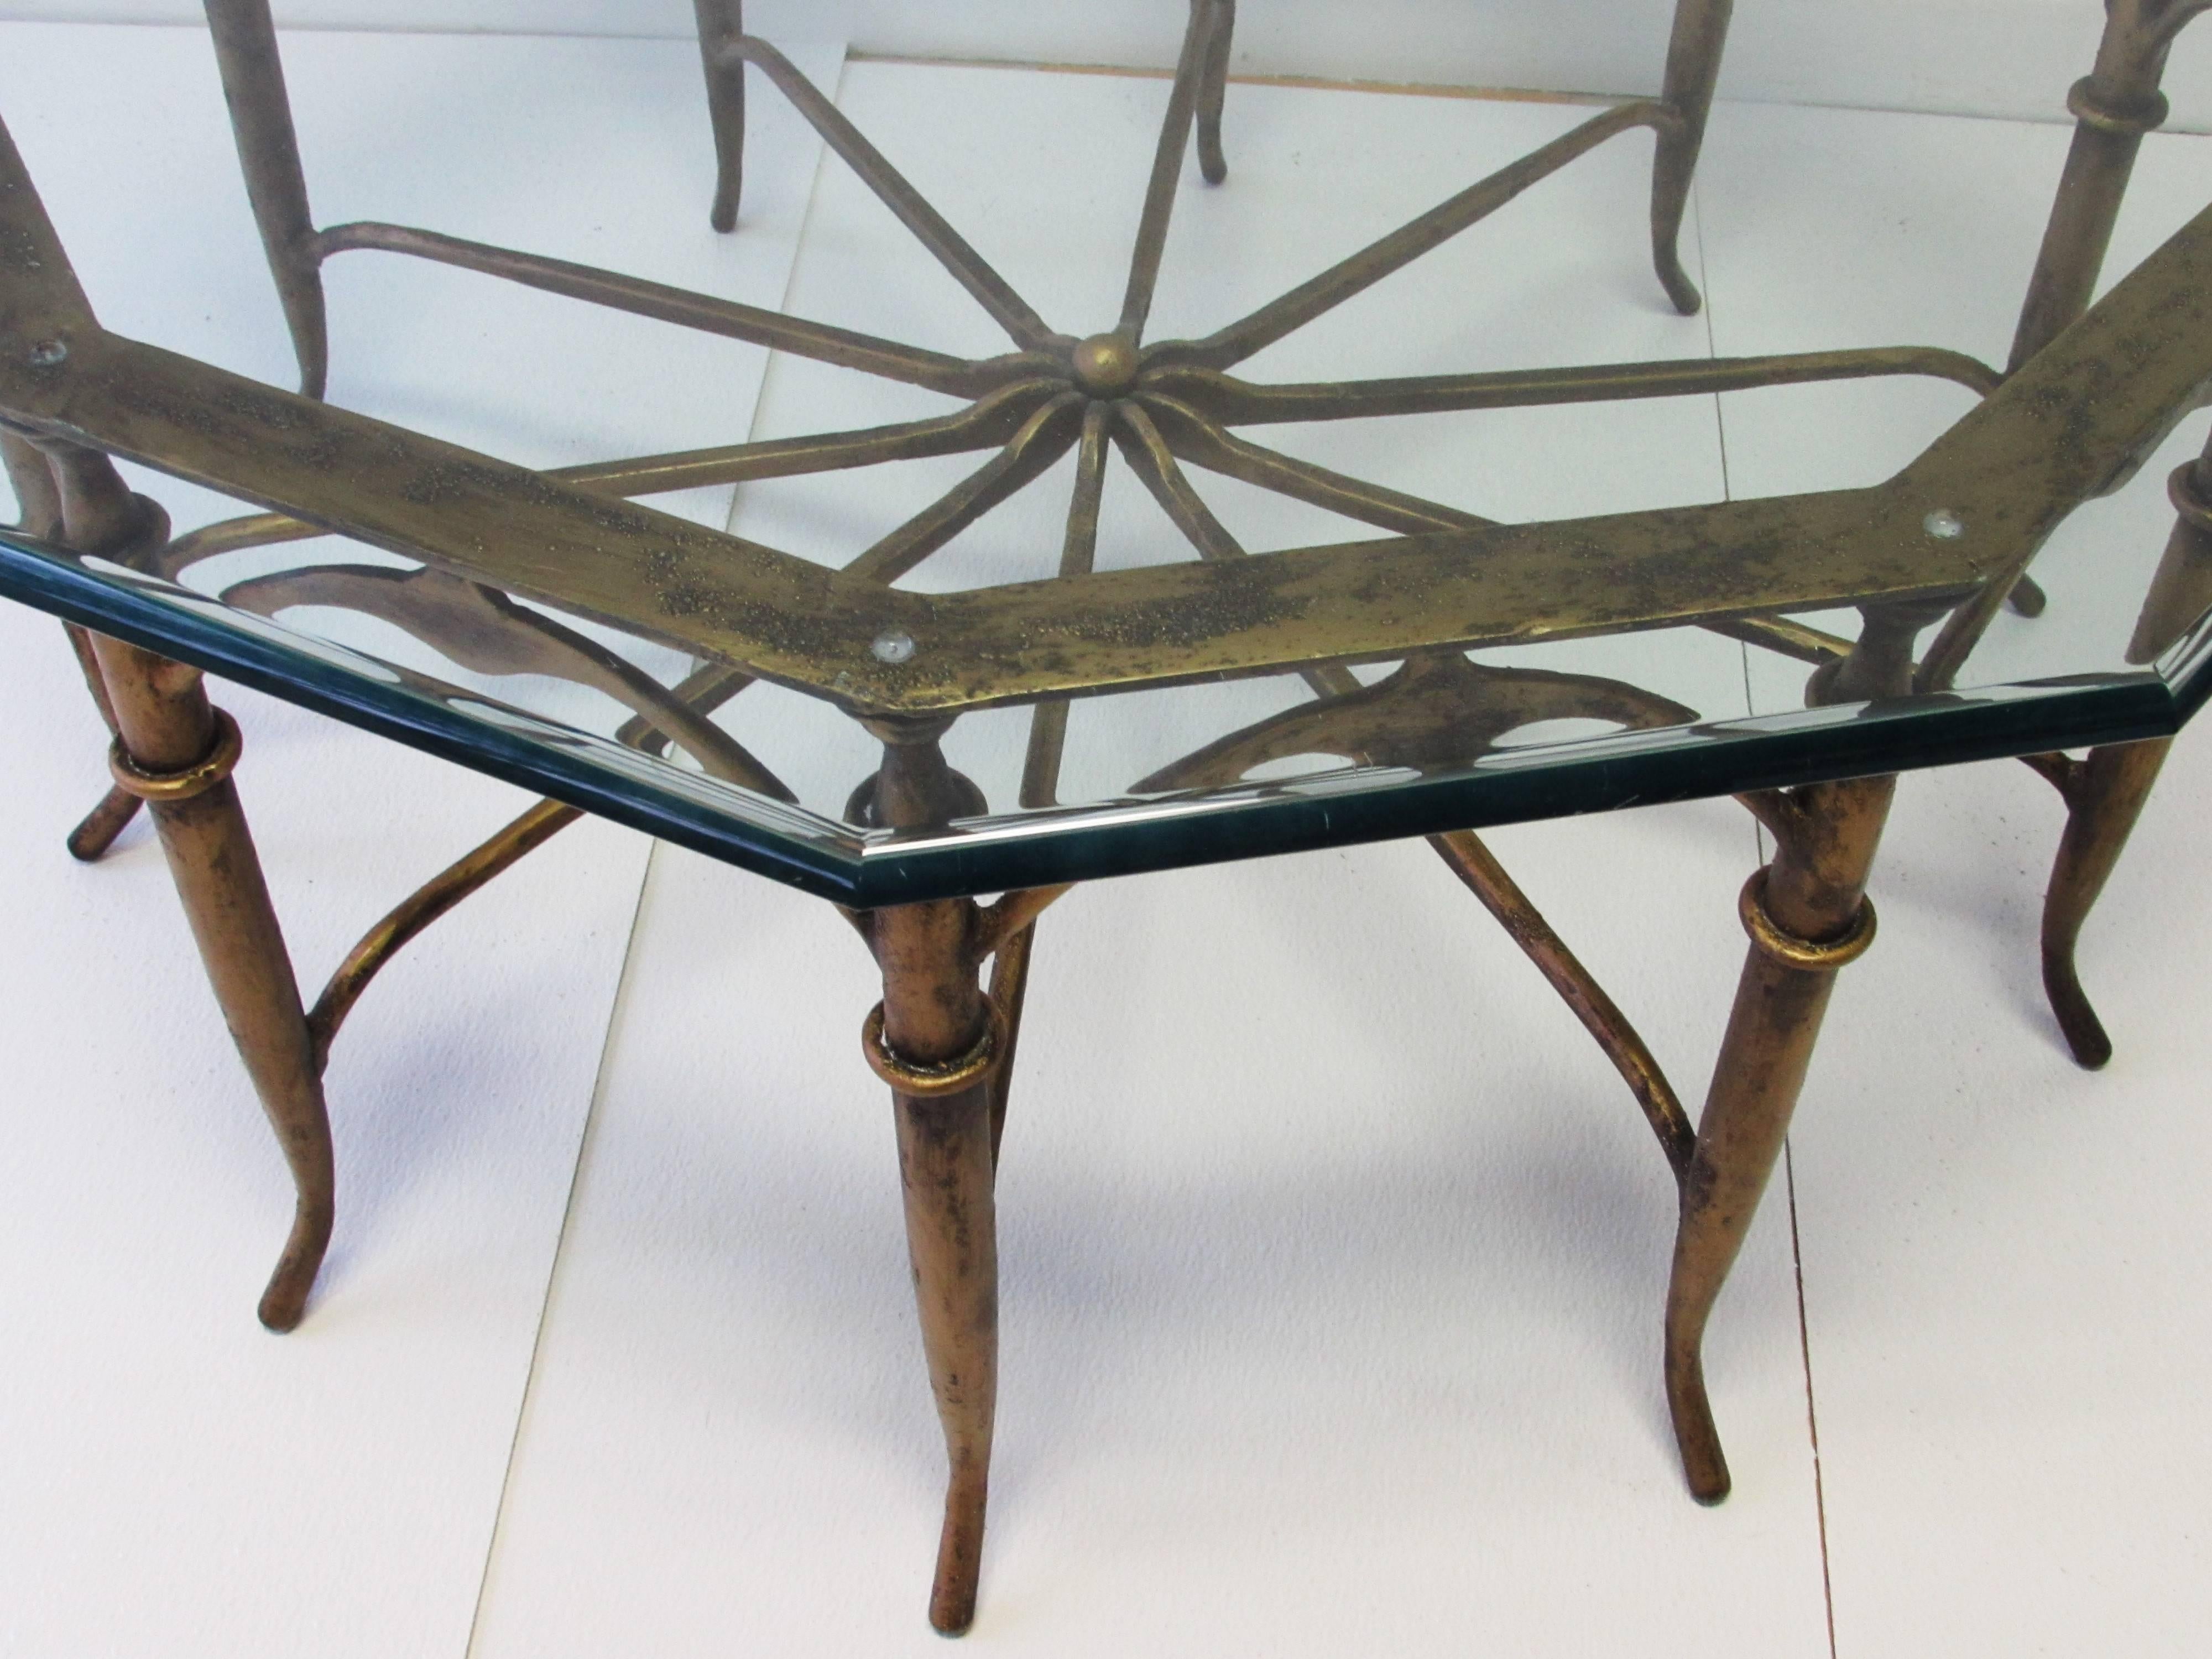 Italian Spider Leg Coffee Table In Excellent Condition For Sale In Raleigh, NC